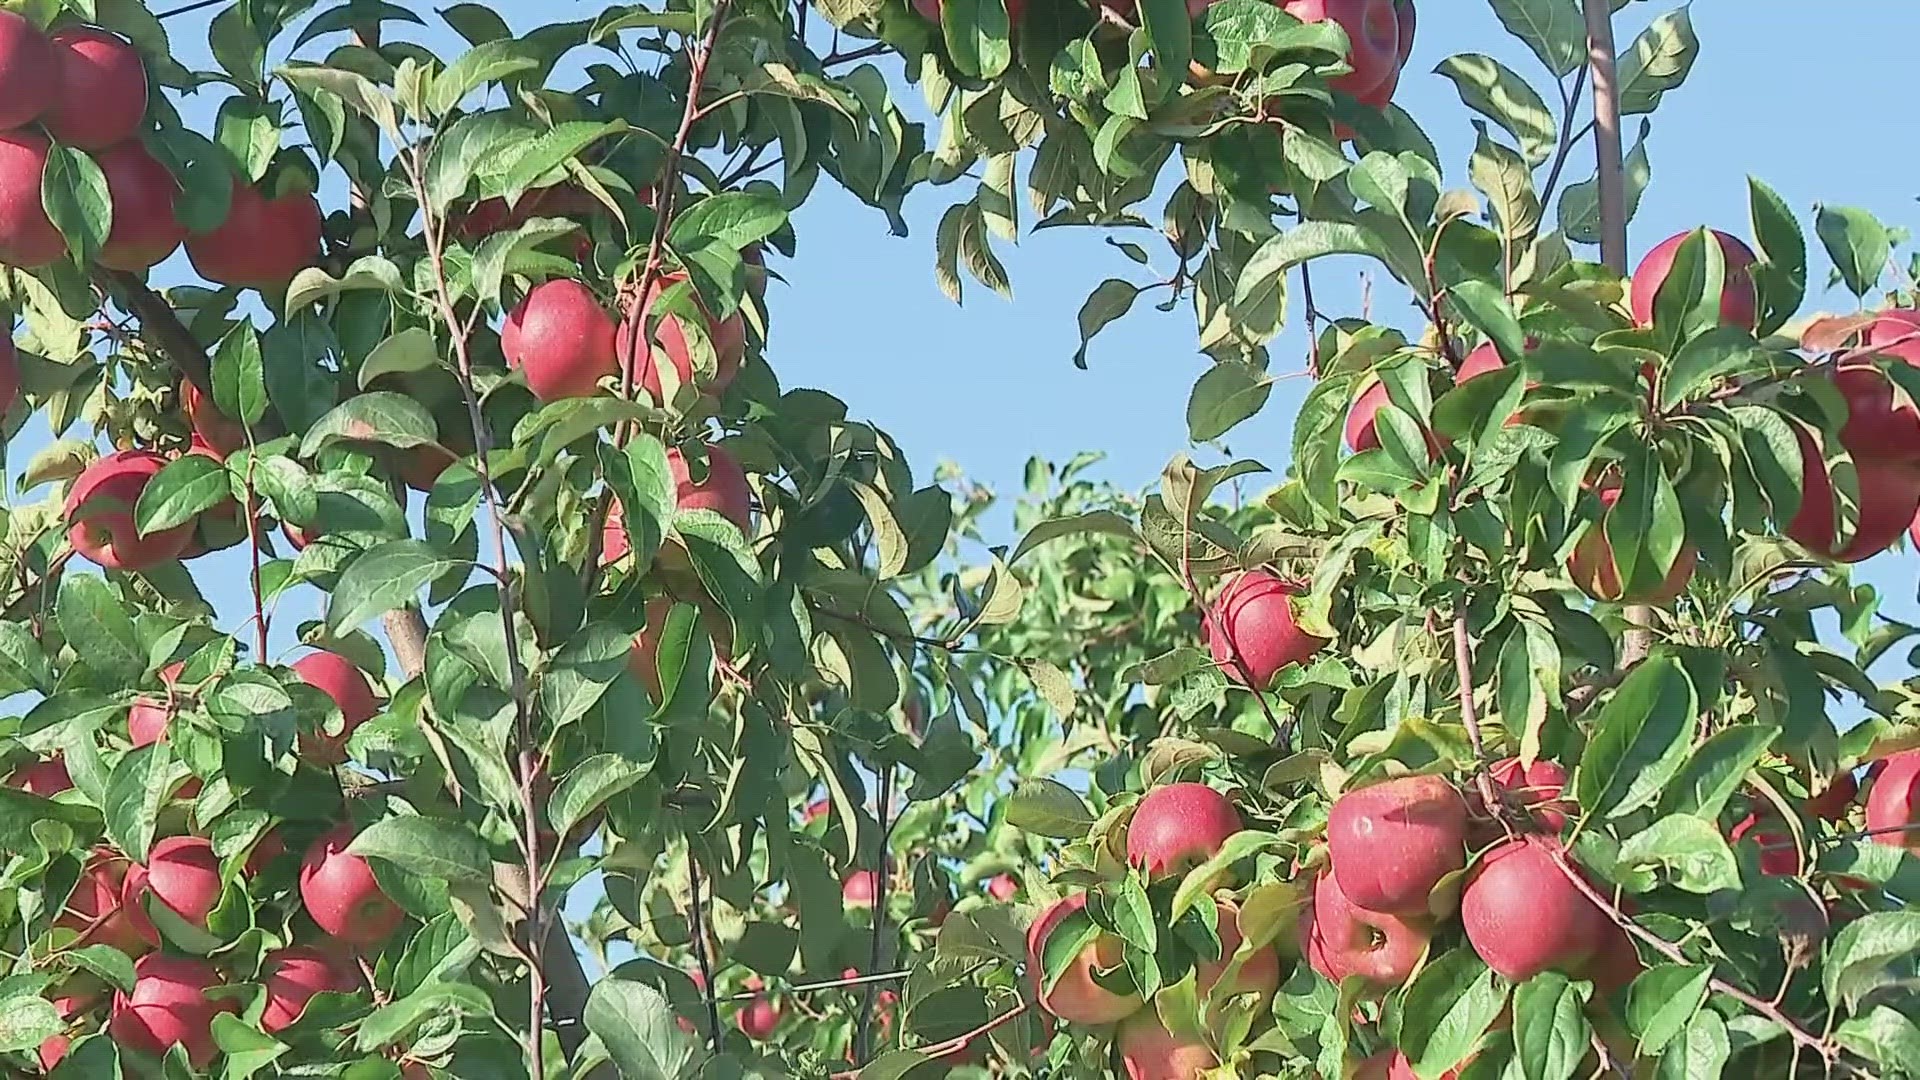 Farmers at Lynd Fruit Farm said the crop is good this year, despite having to combat a few issues with spring hail and summer Air Quality Alerts.